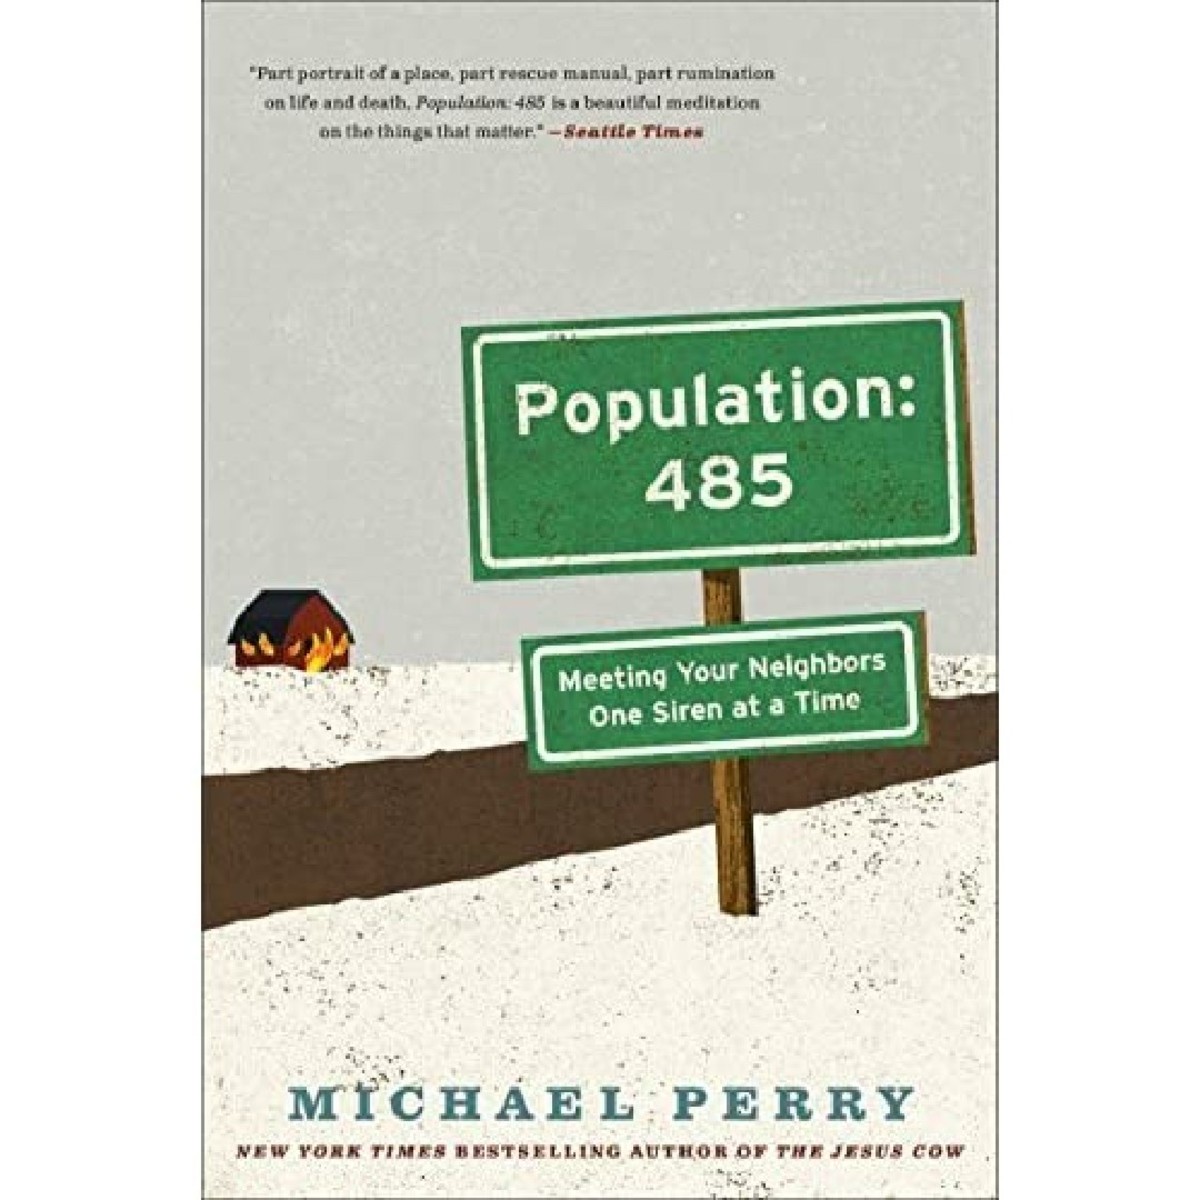 'Population: 485: Meeting Your Neighbors One Siren at a Time' by Michael Perry